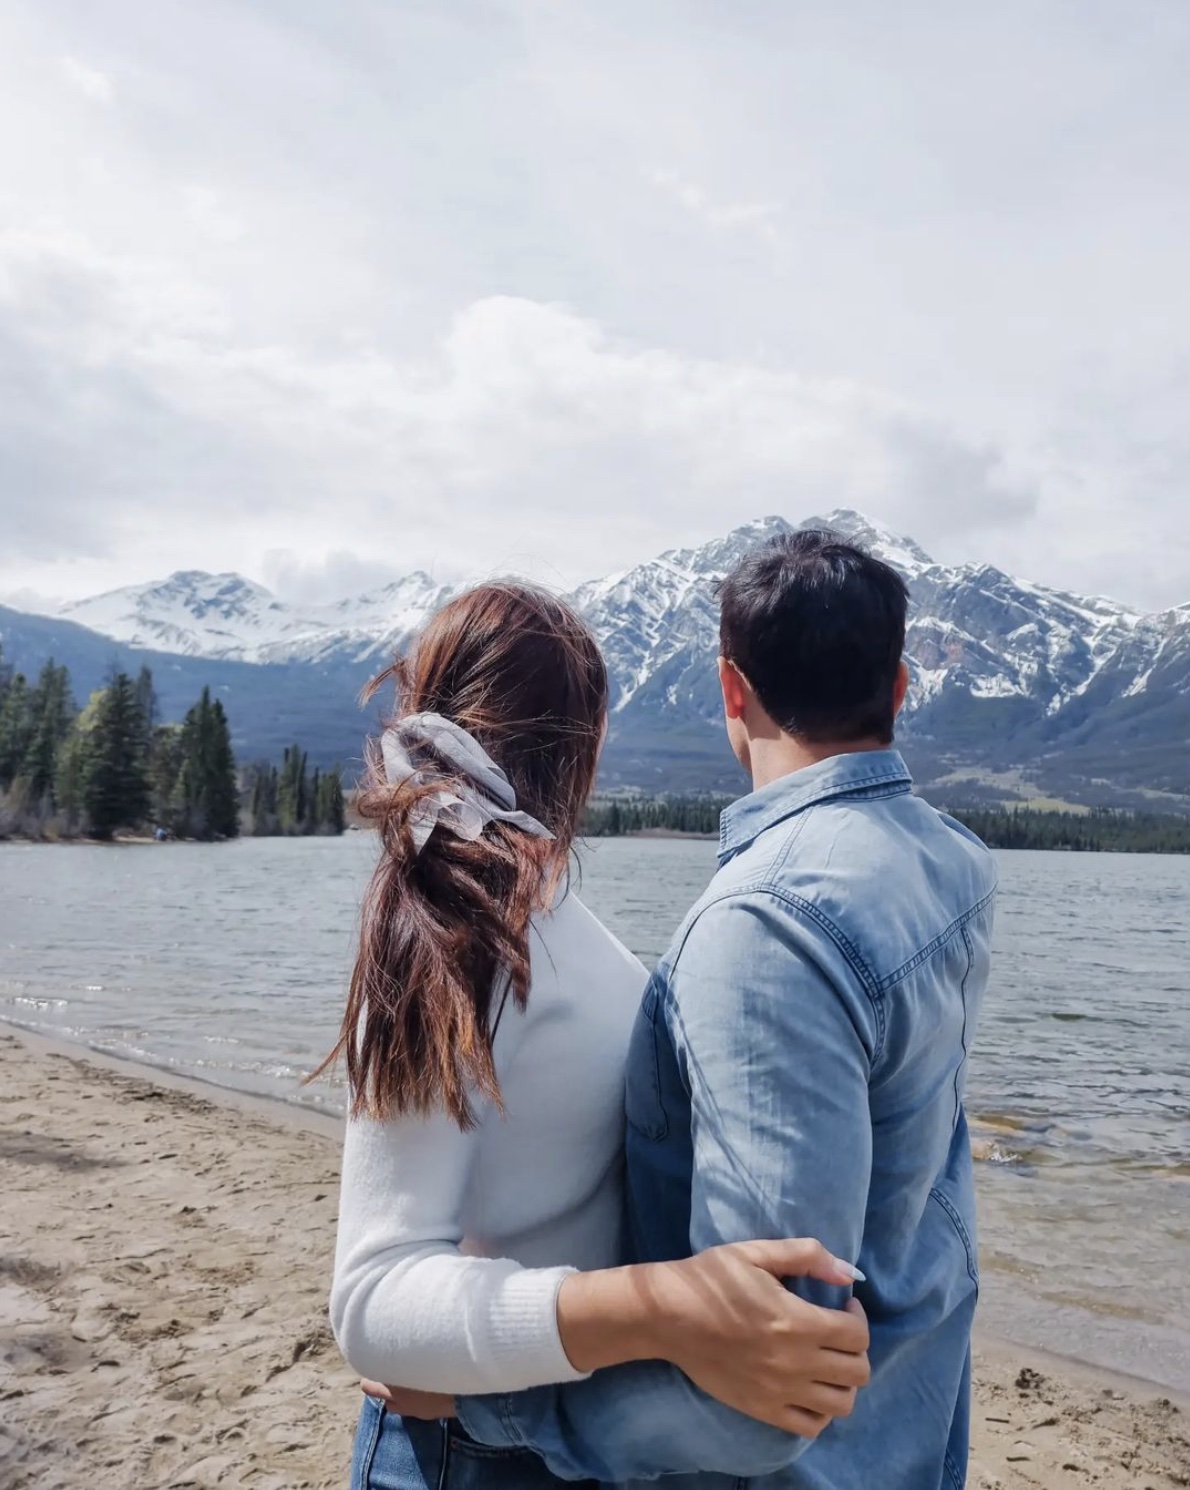 catriona and sam milby in canada